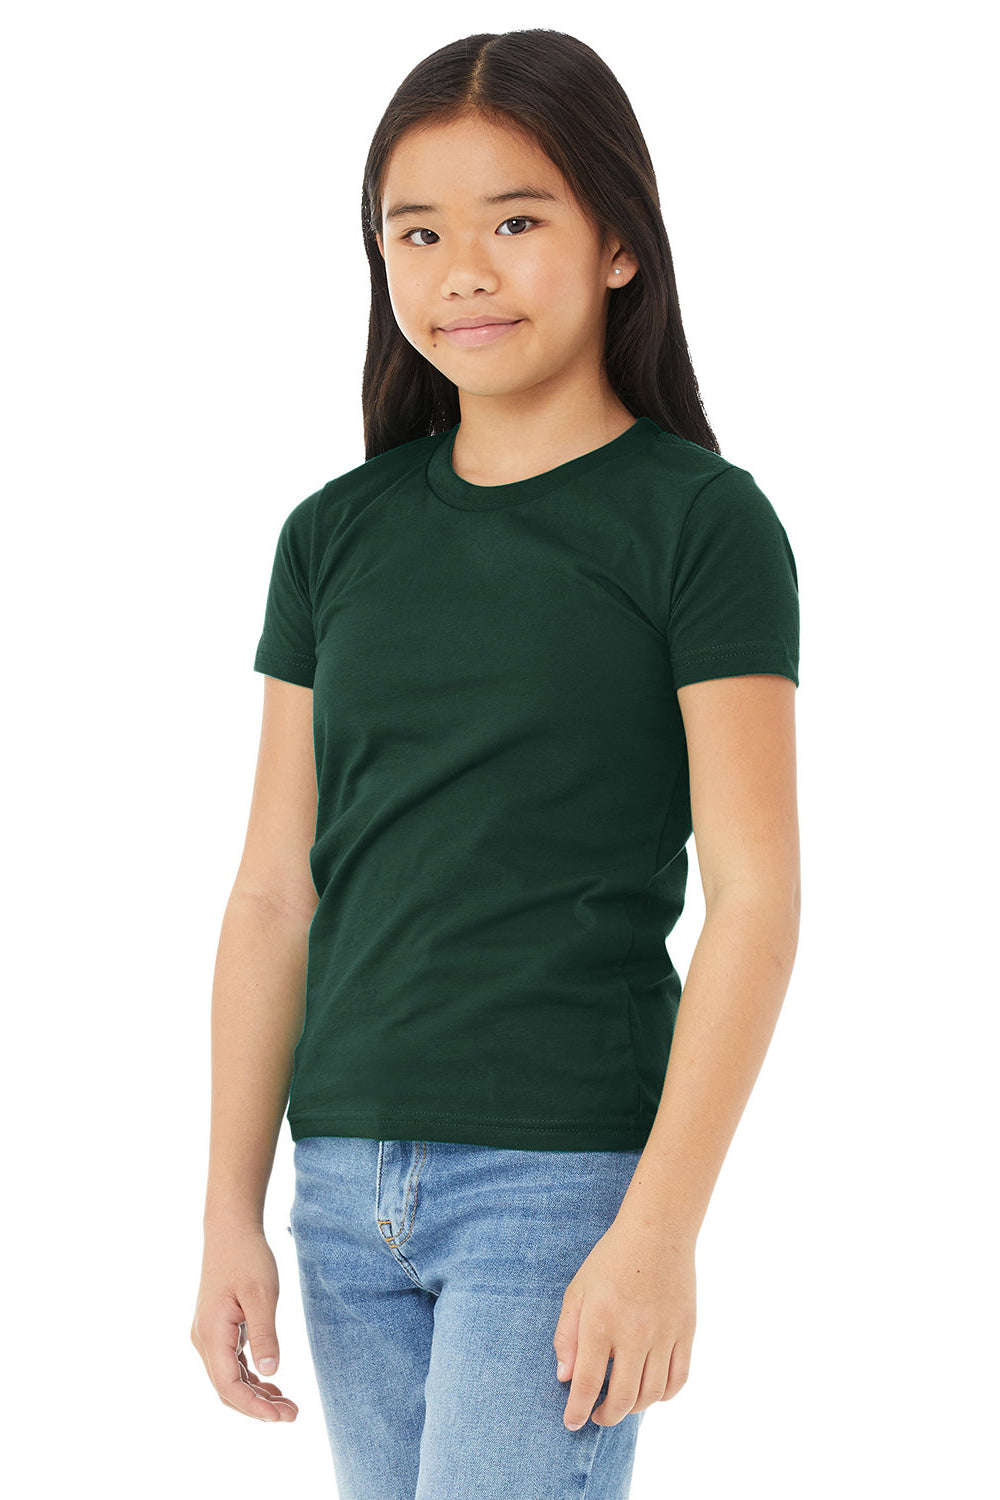 Bella + Canvas 3001Y Youth Jersey Short Sleeve Crewneck T-Shirt Forest Green Model 3Q